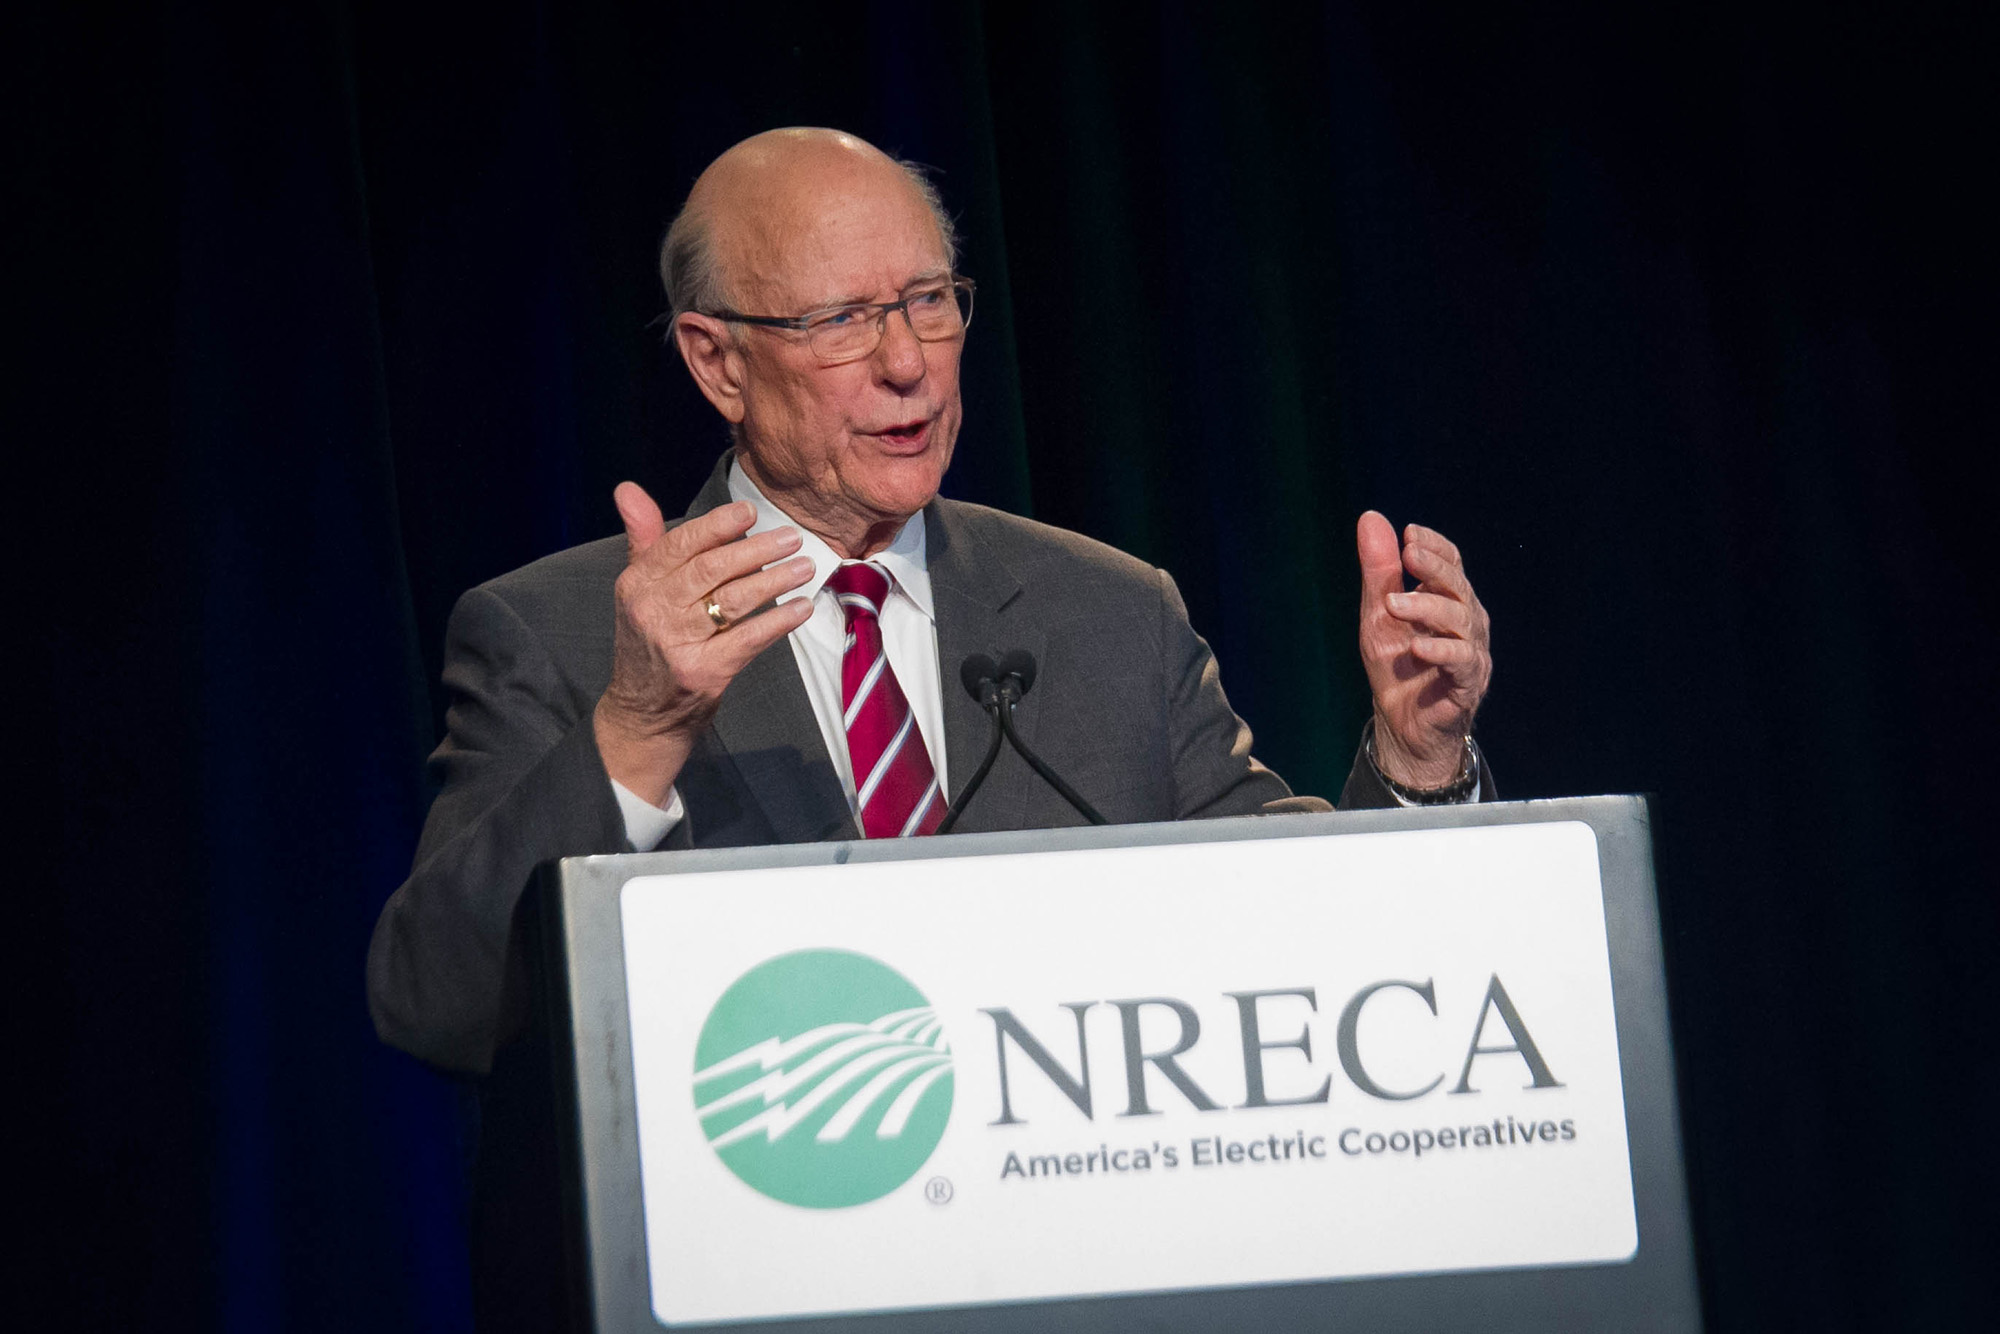 Senate Agriculture Committee Chairman Pat Roberts, R-Kan., tells electric co-op leaders at NRECA’s 2018 Legislative Conference that work continues on the Farm Bill. (Photo By: Luis Gomez Photos)